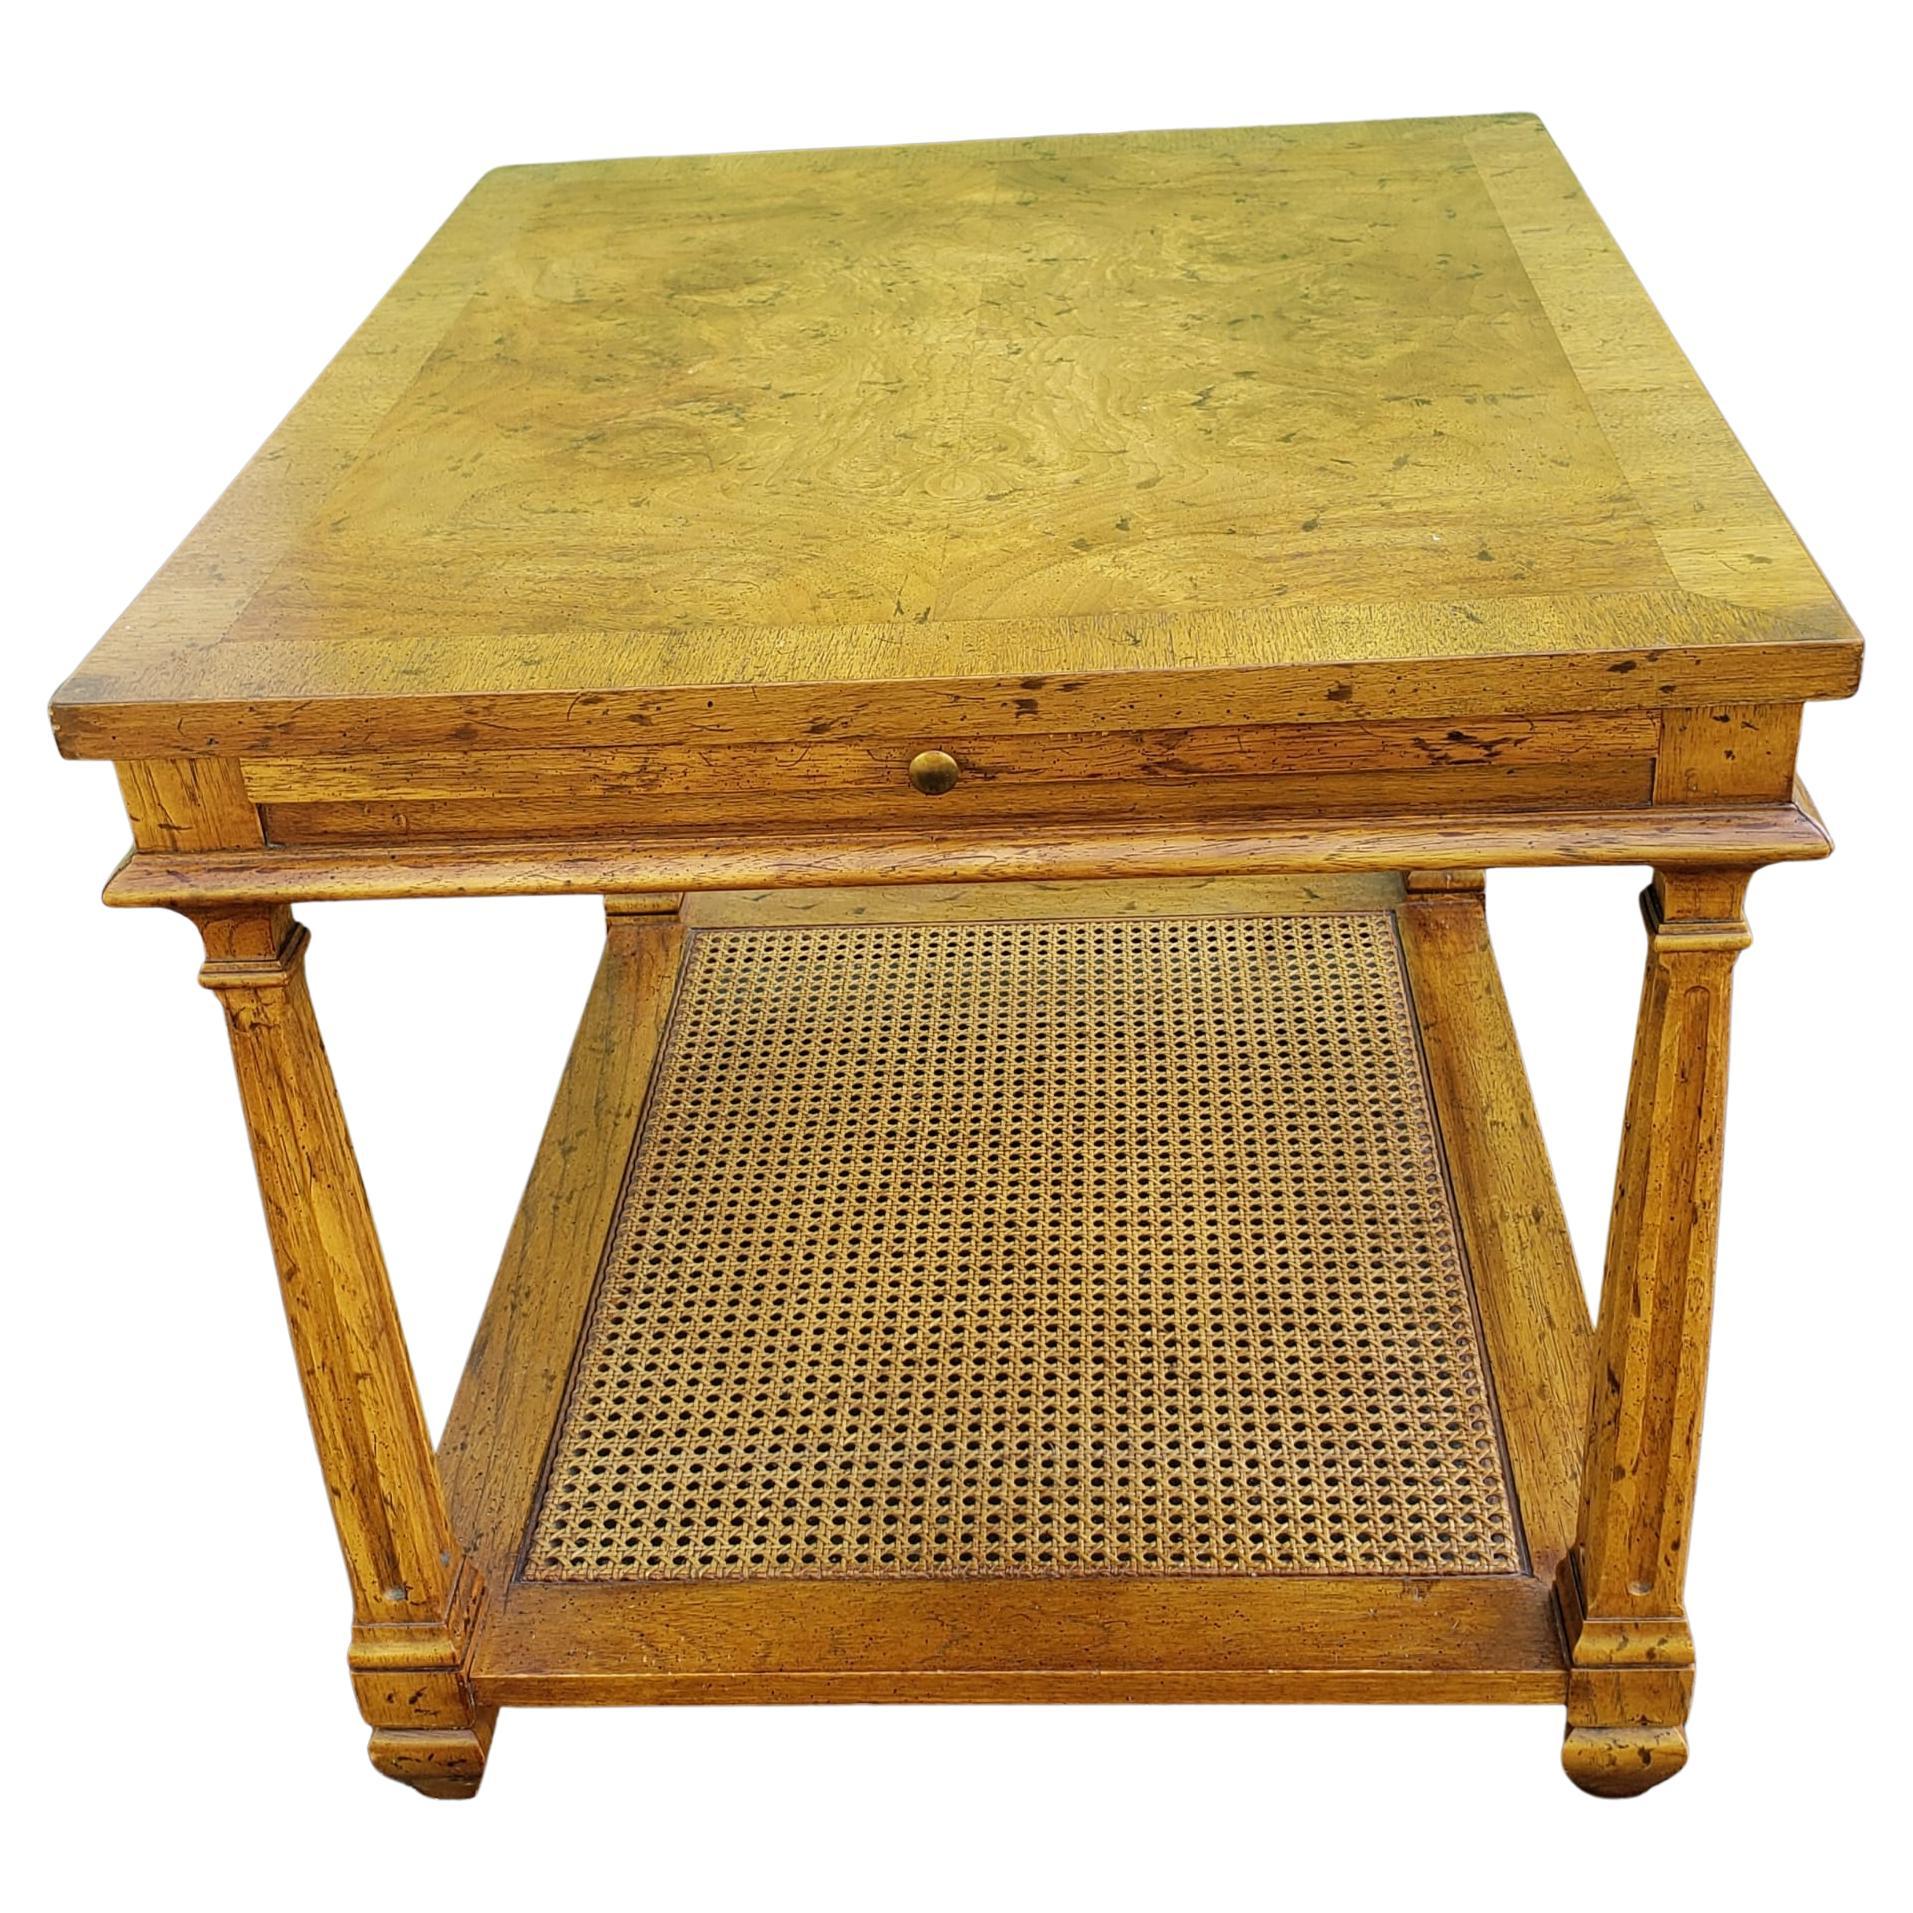 Heritage Furniture American two-Tier Burl Fruitwood, banded top and Caned lower tier Side Table with Pull-out Tray.
Great vintage condition. Measures 22